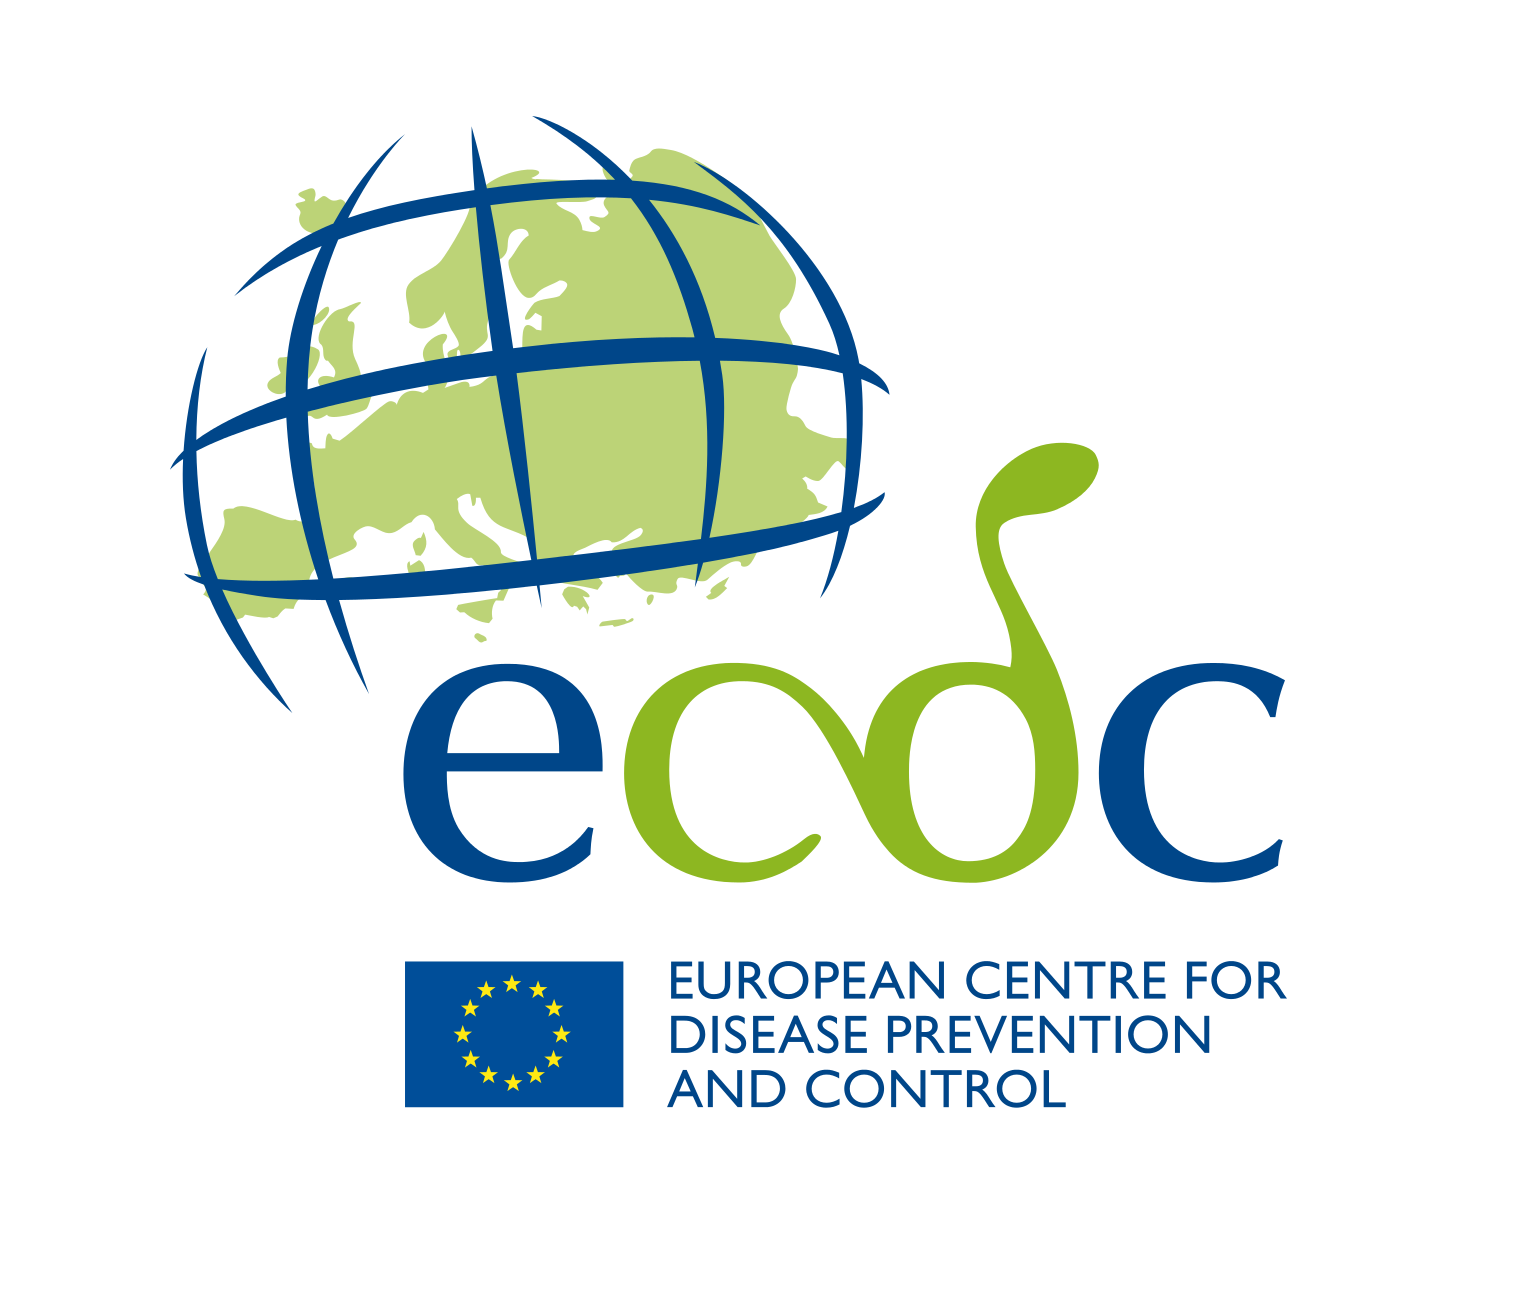 European Centre for Disease prevention and control logo